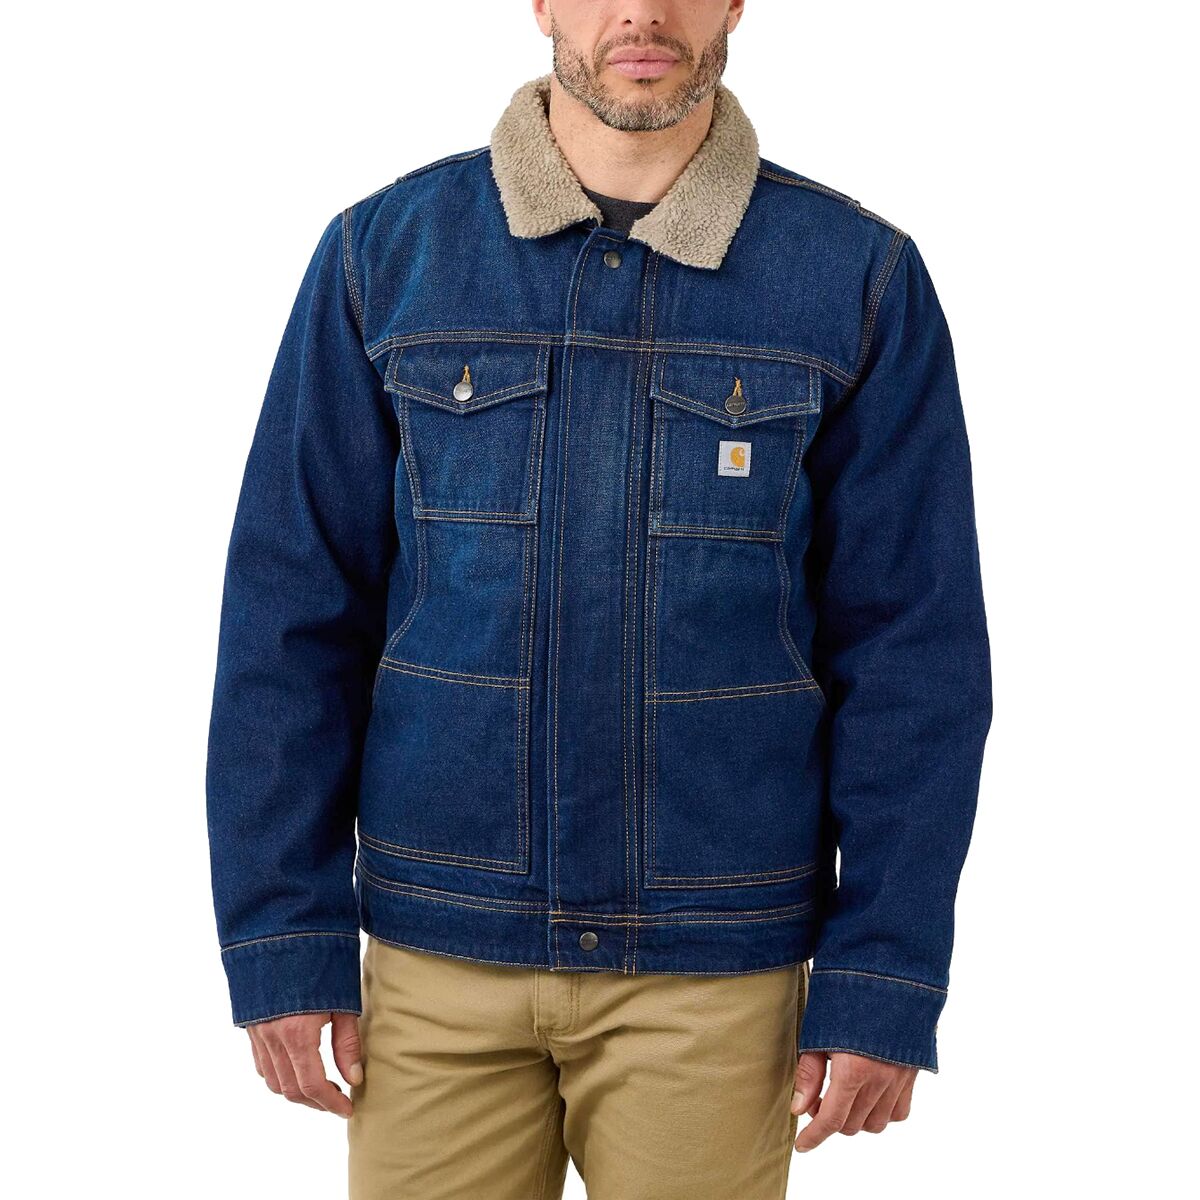 Relaxed Fit Denim Sherpa Lined Jacket   Men's